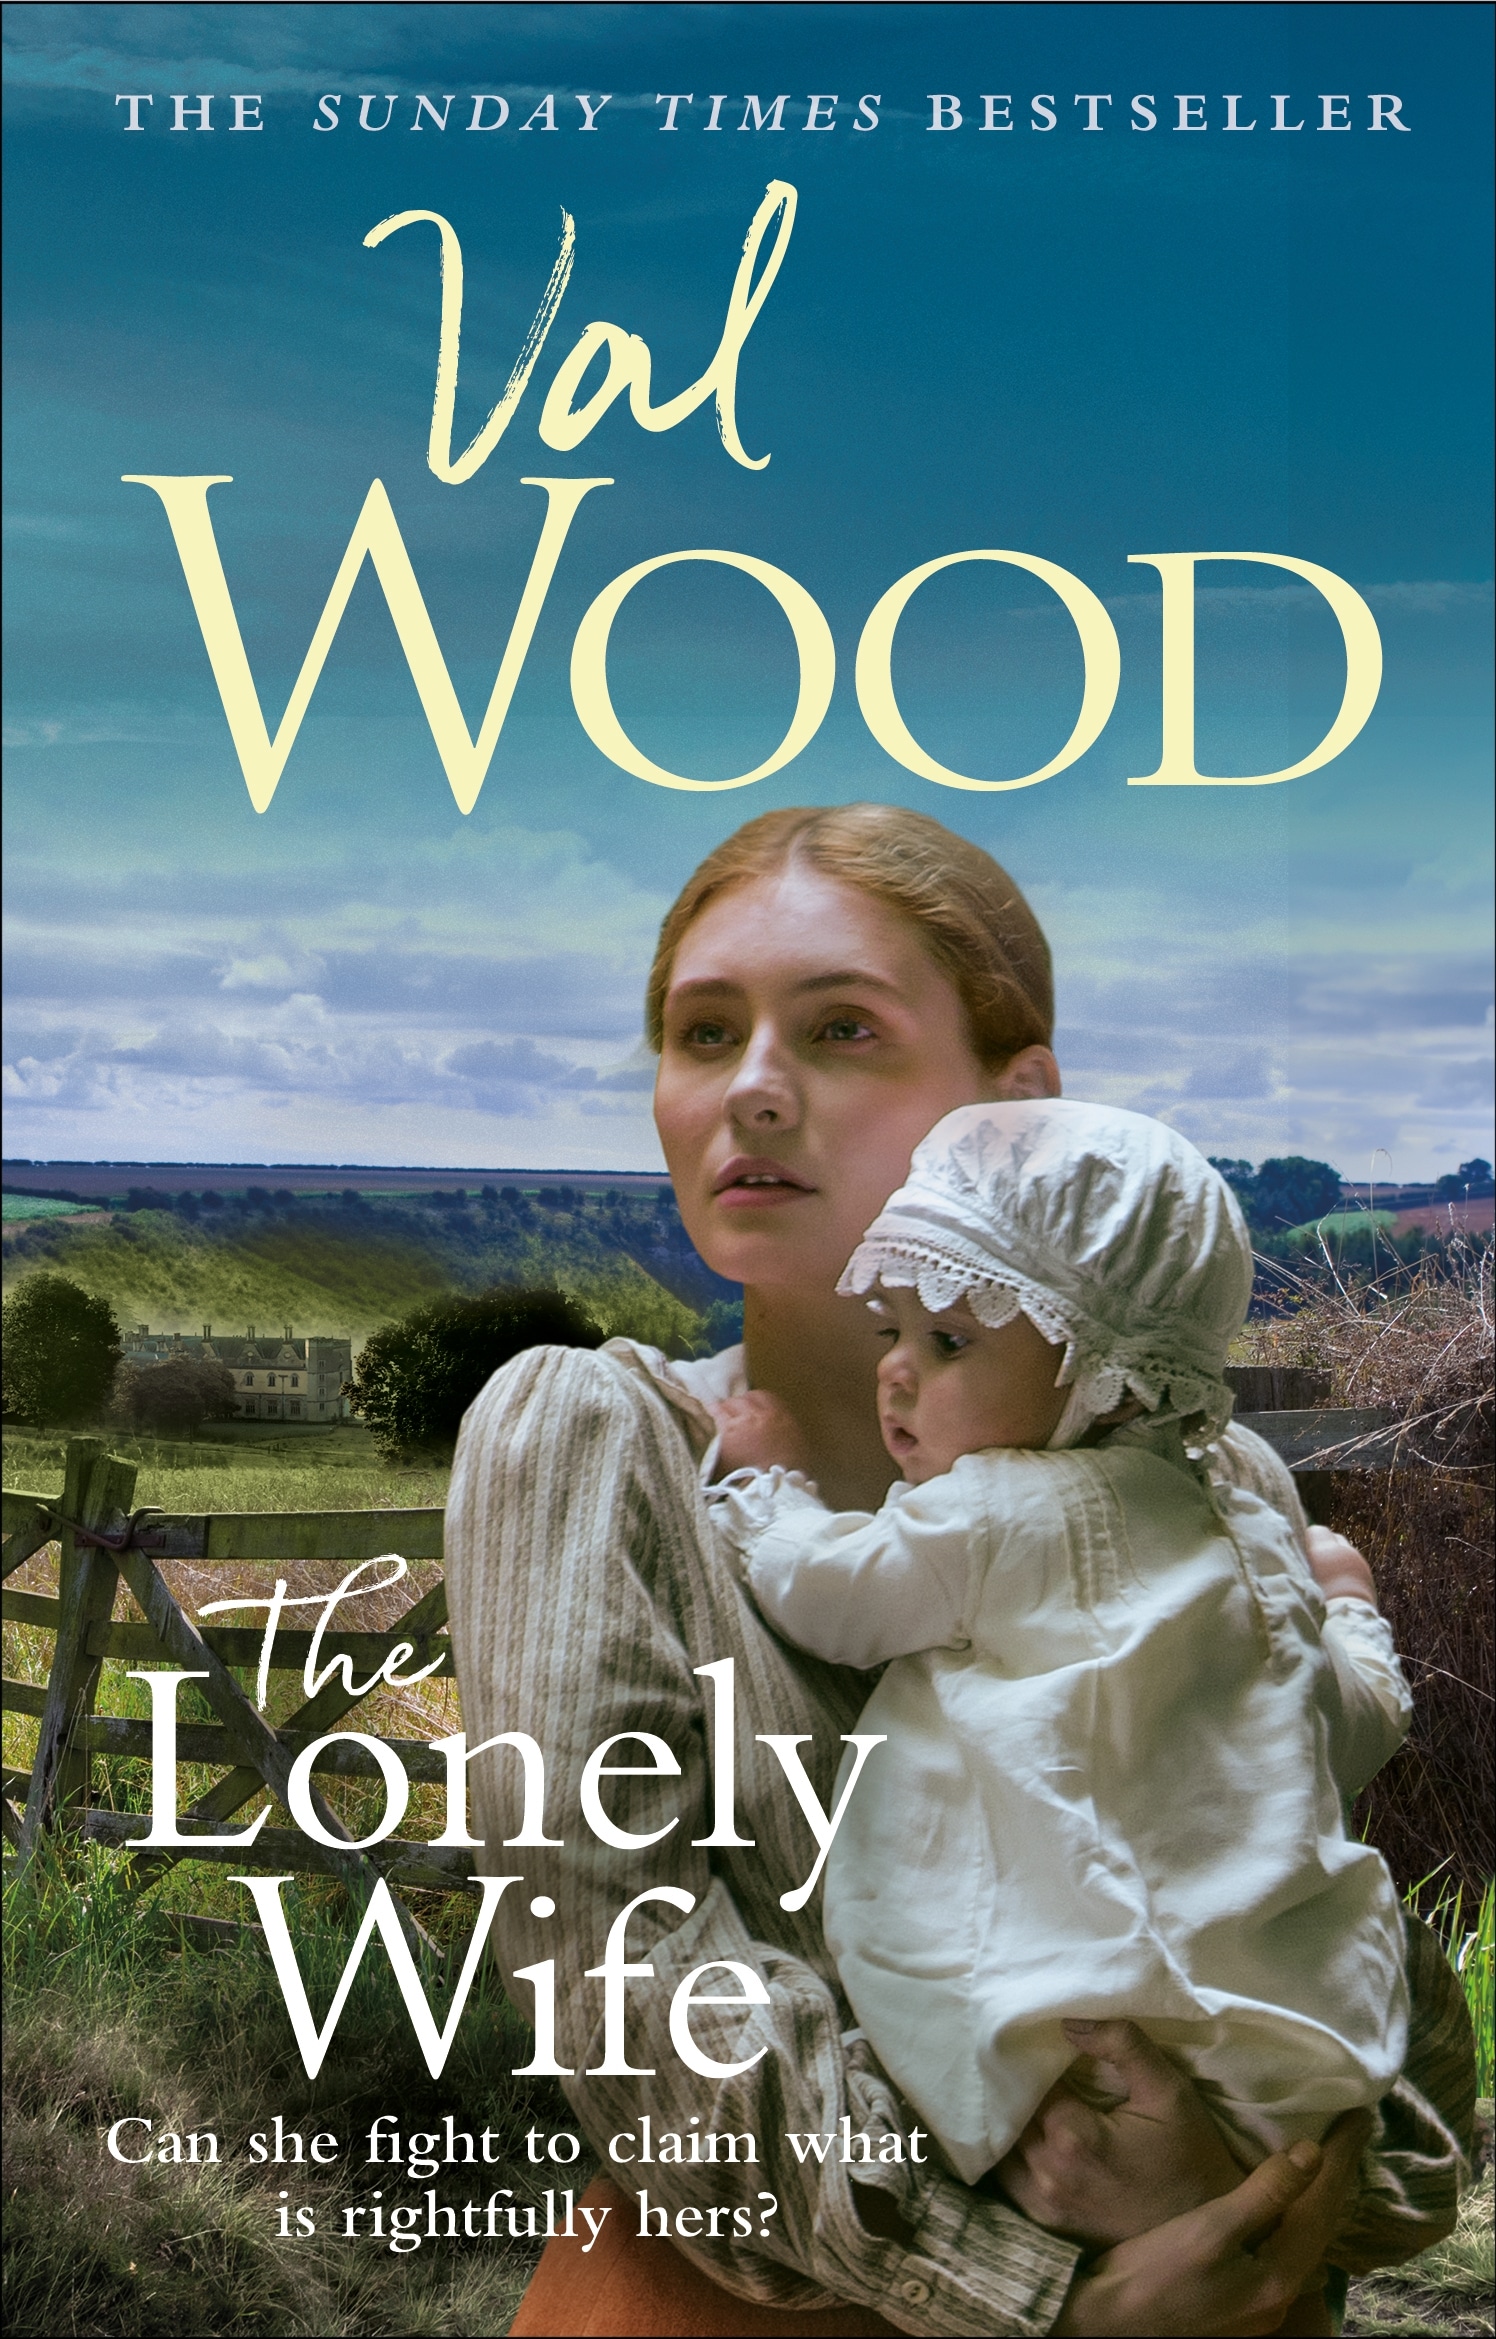 Book “The Lonely Wife” by Val Wood — January 21, 2021